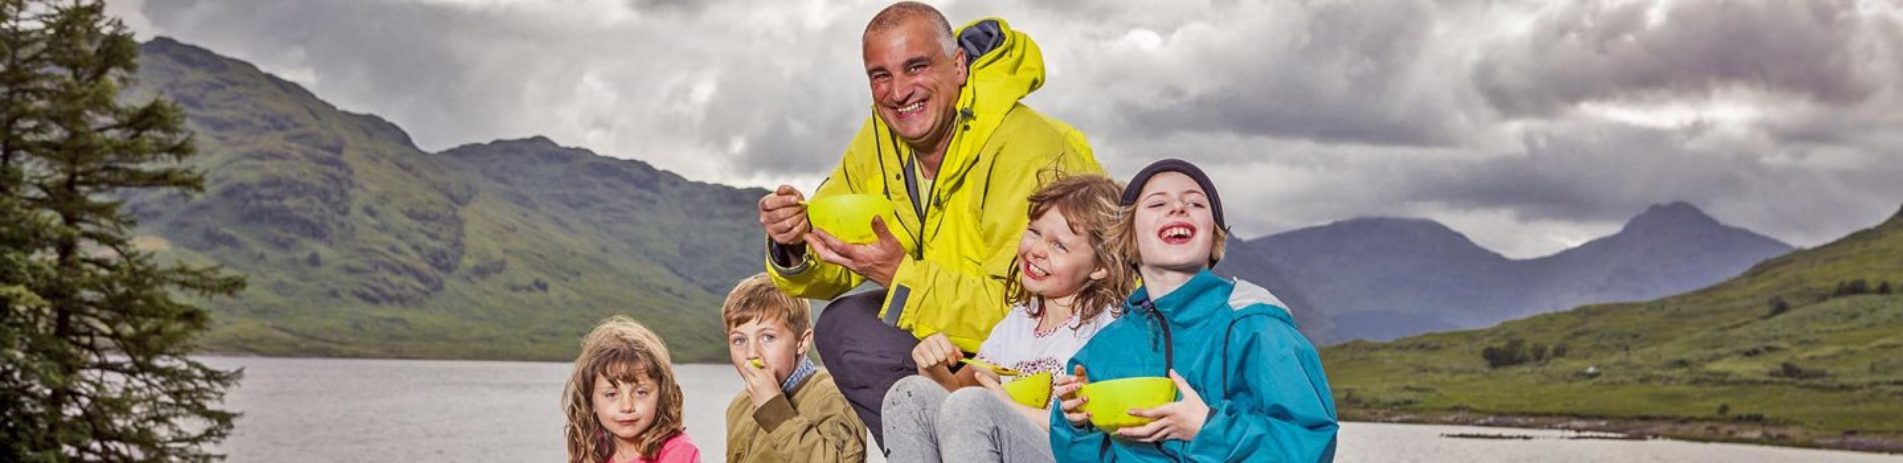 man-in-light-green-jacket-with-short-white-hair-eating-from-bowls-with-four-young-children-on-grass-with-lush-loch-arklet-landscape-behind-foraging-event